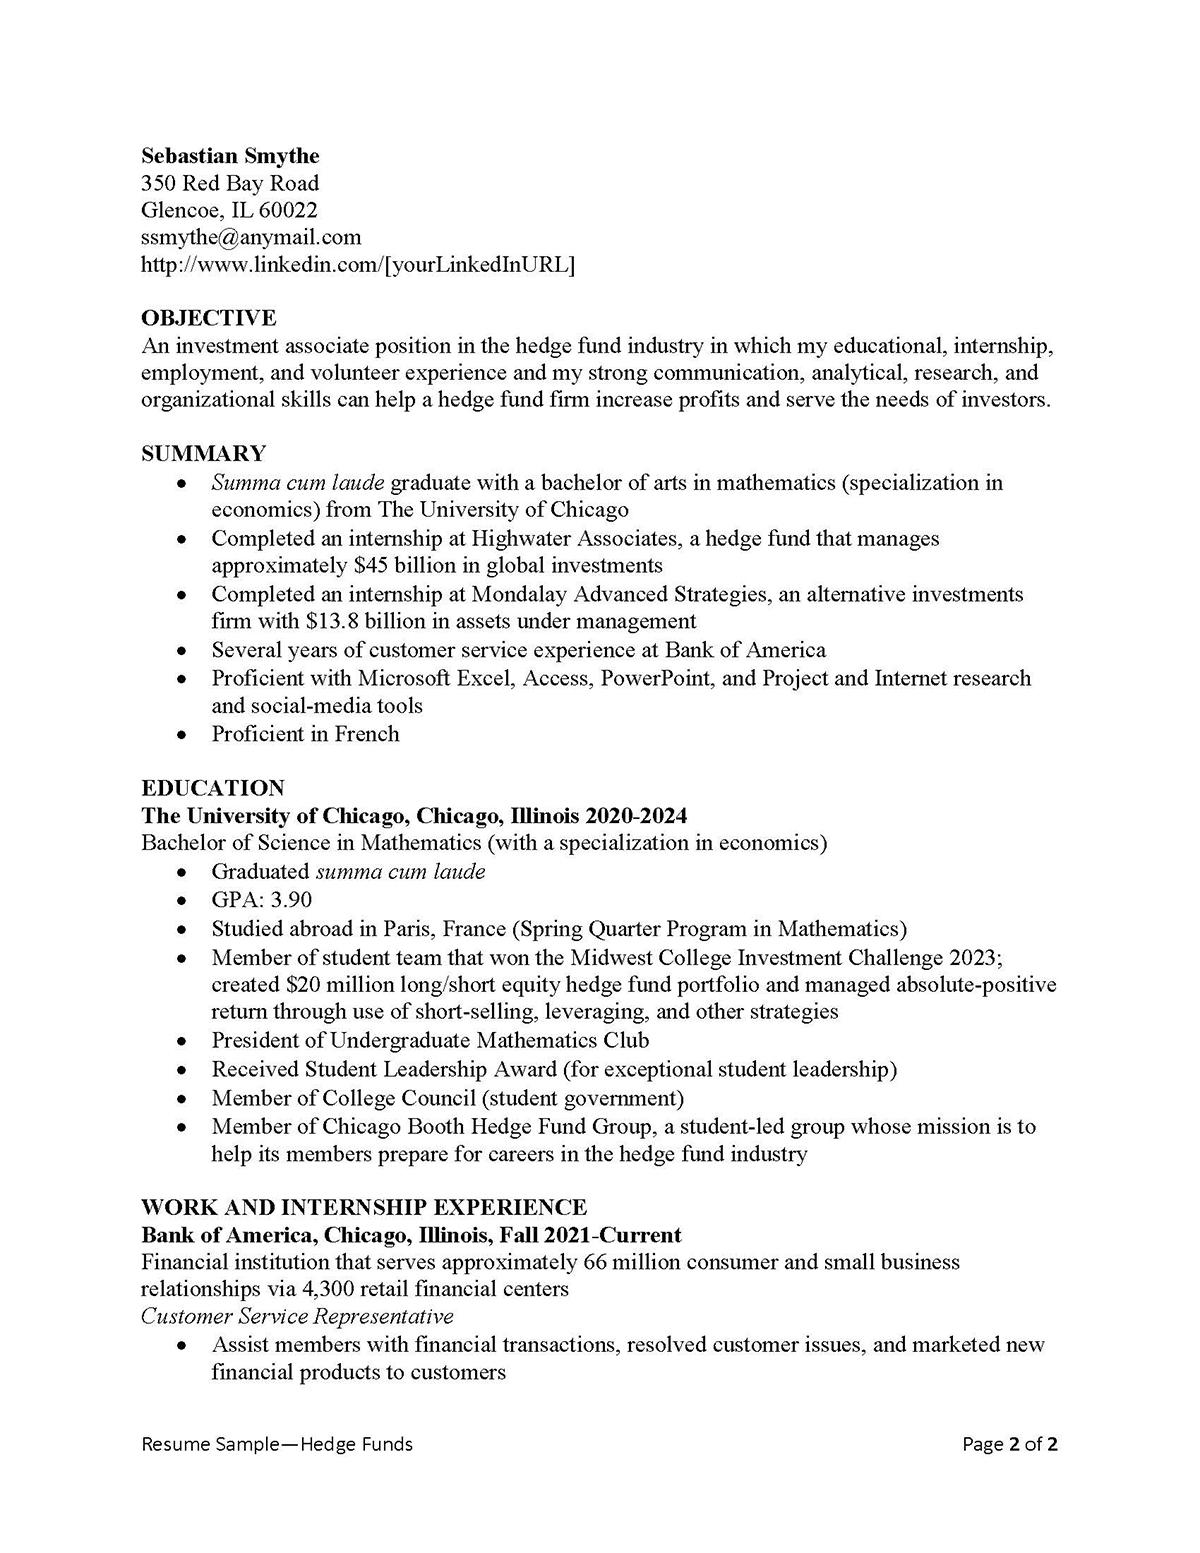 Sample resume: Hedge Funds, Entry Level, Combination